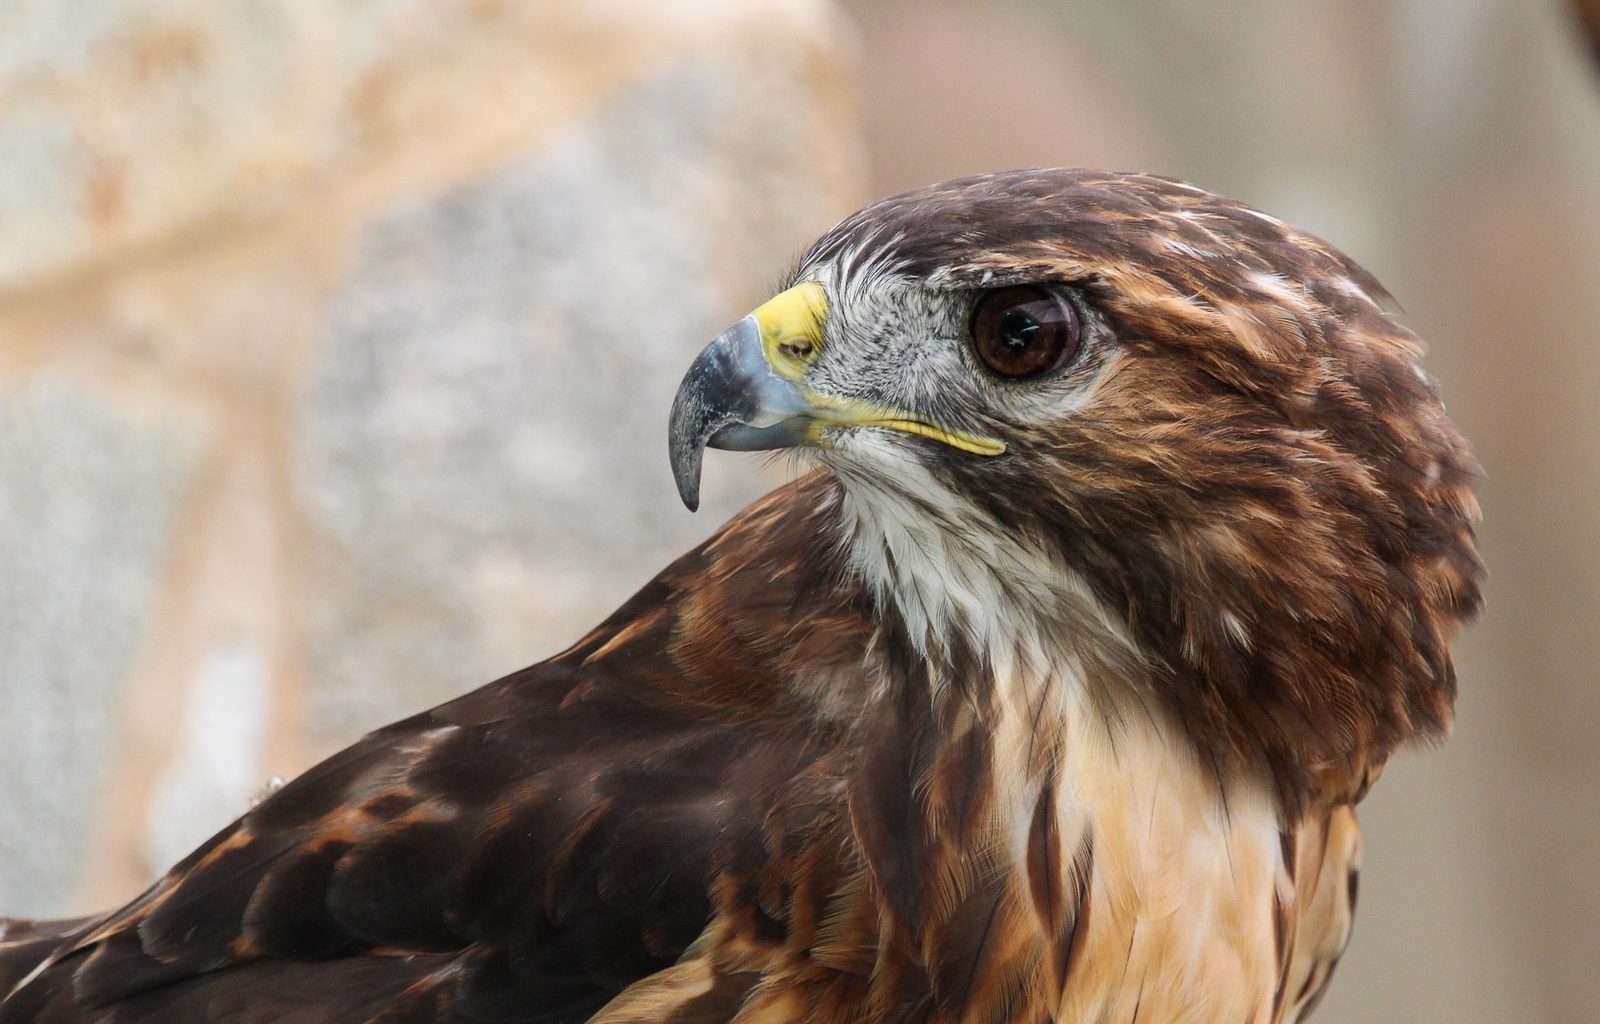 closeup photography of brown eagle